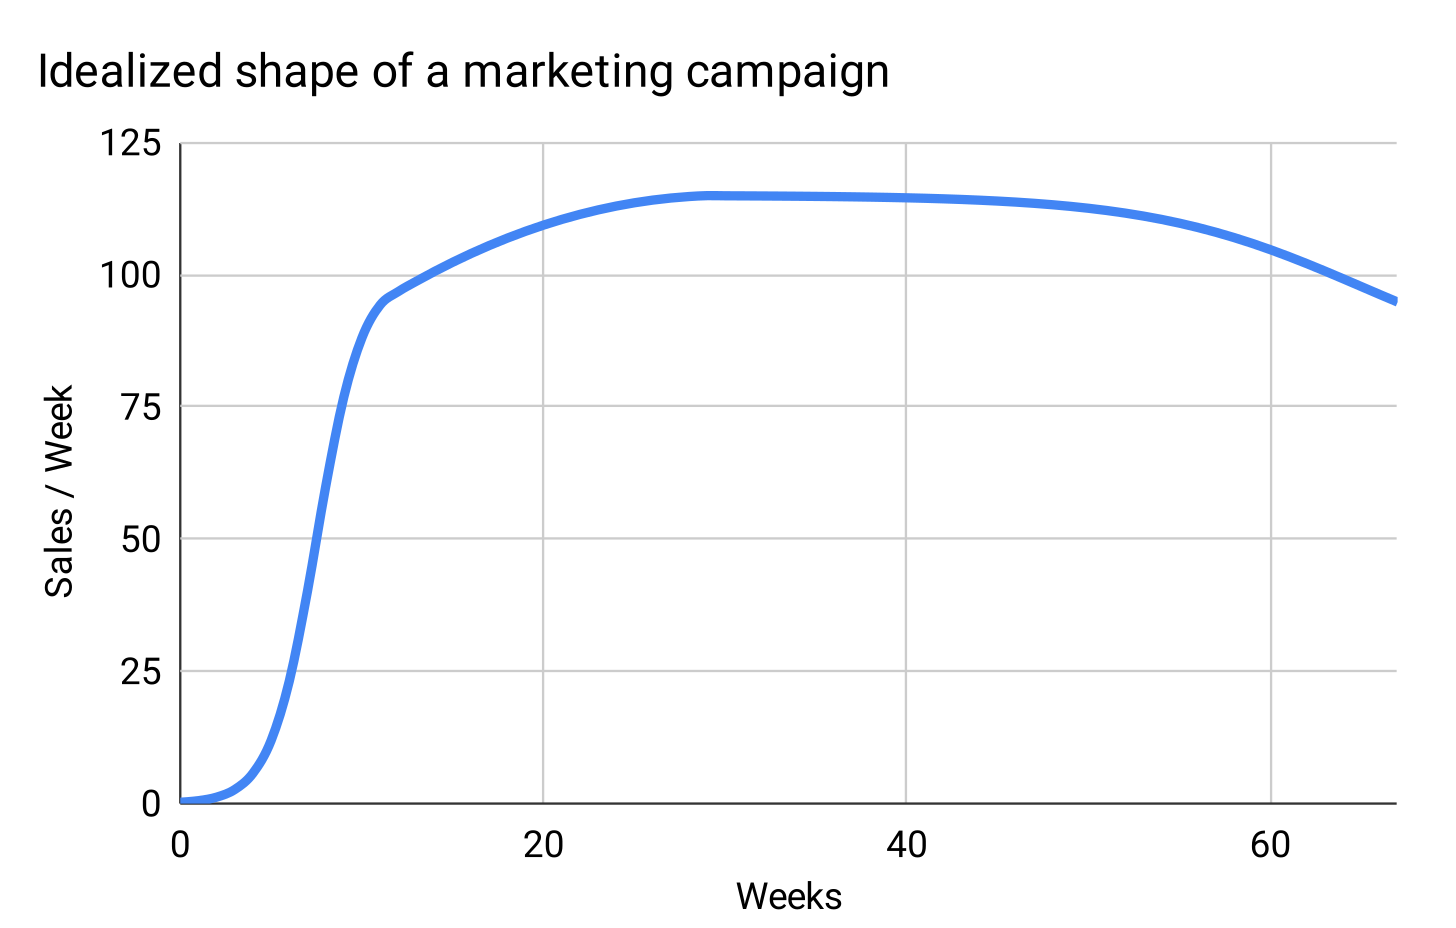 https://longform.asmartbear.com/exponential-growth/Idealized shape of a marketing campaign (3).svg